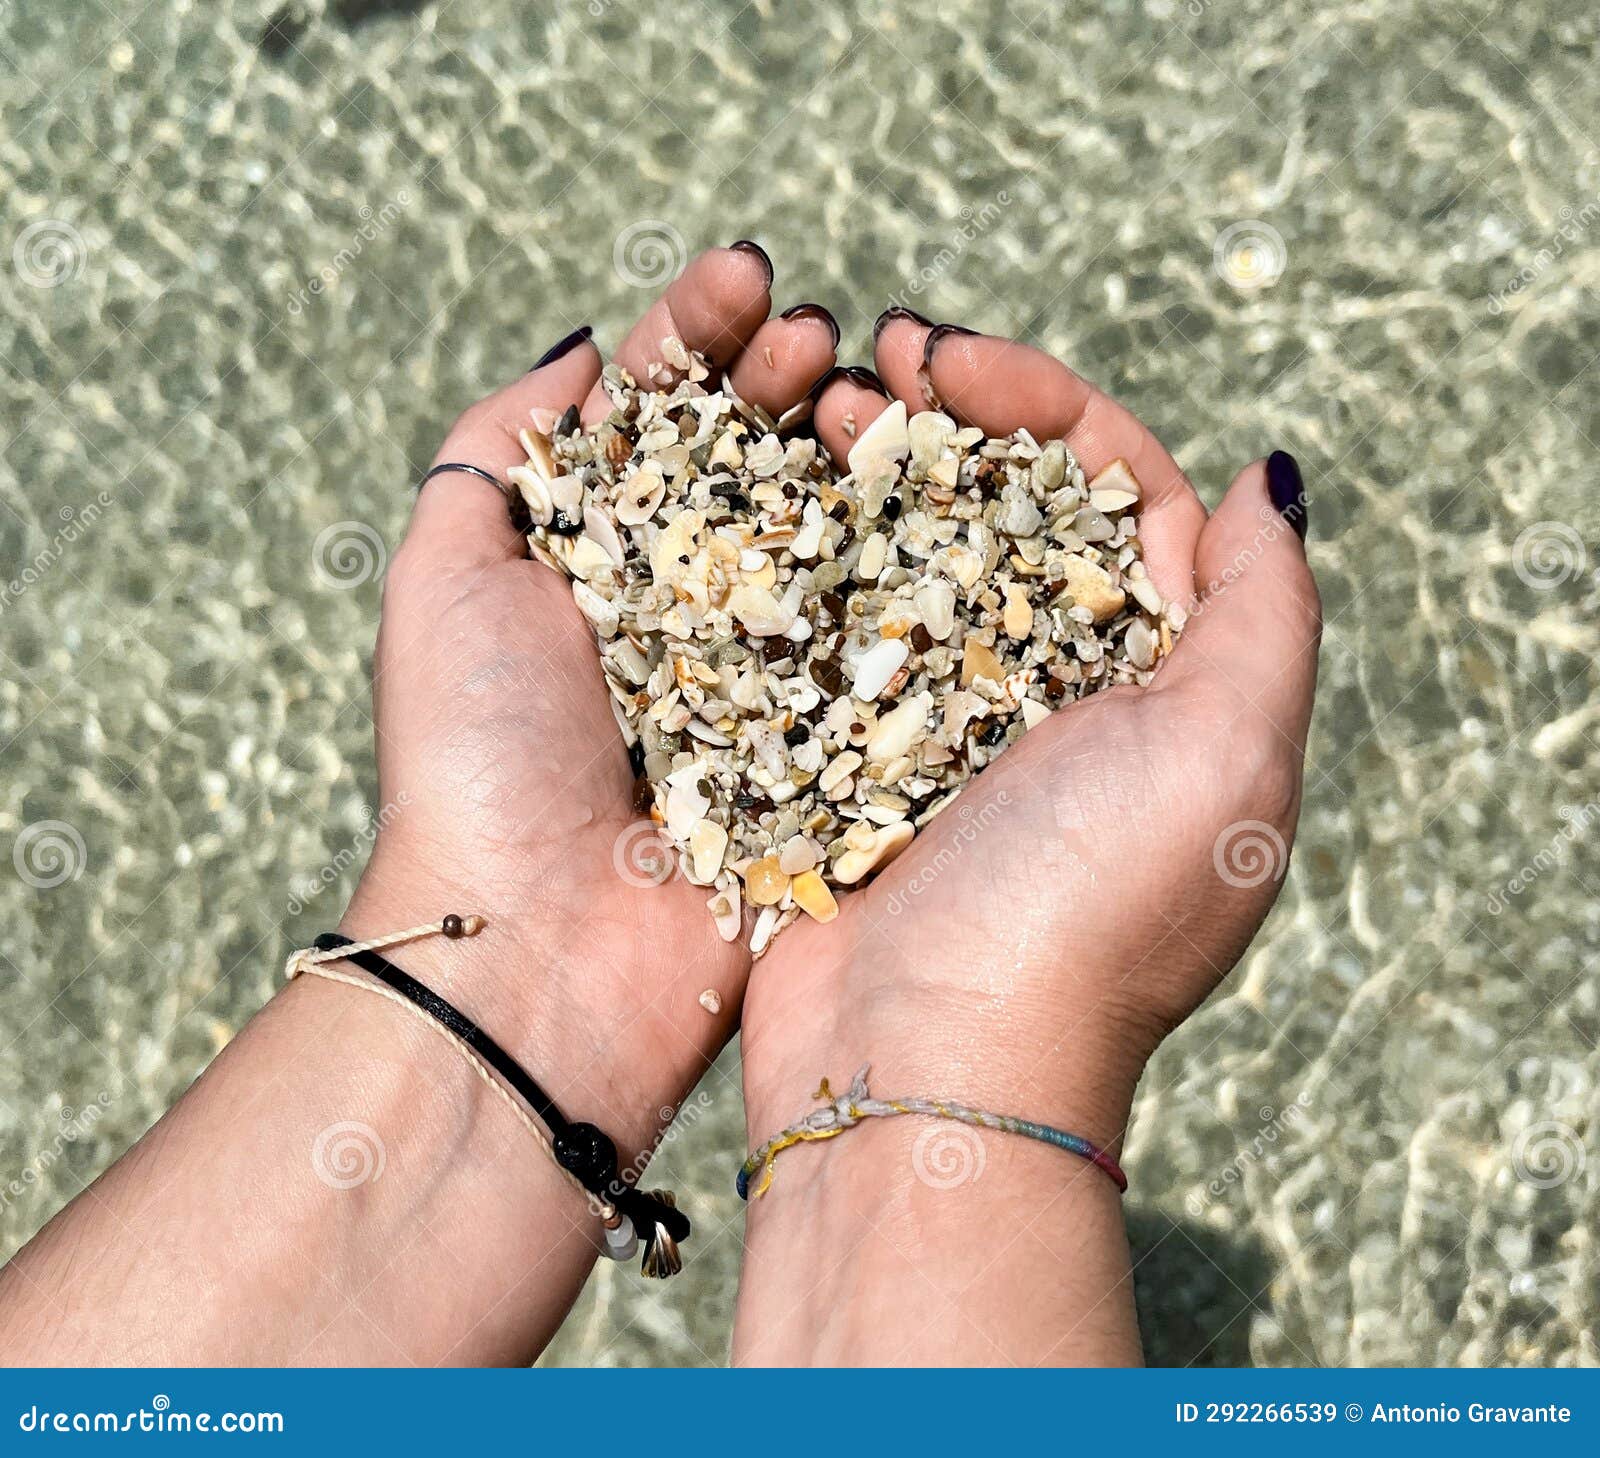 hands in the  of a heart with shells from playa conchal beach in costa rica